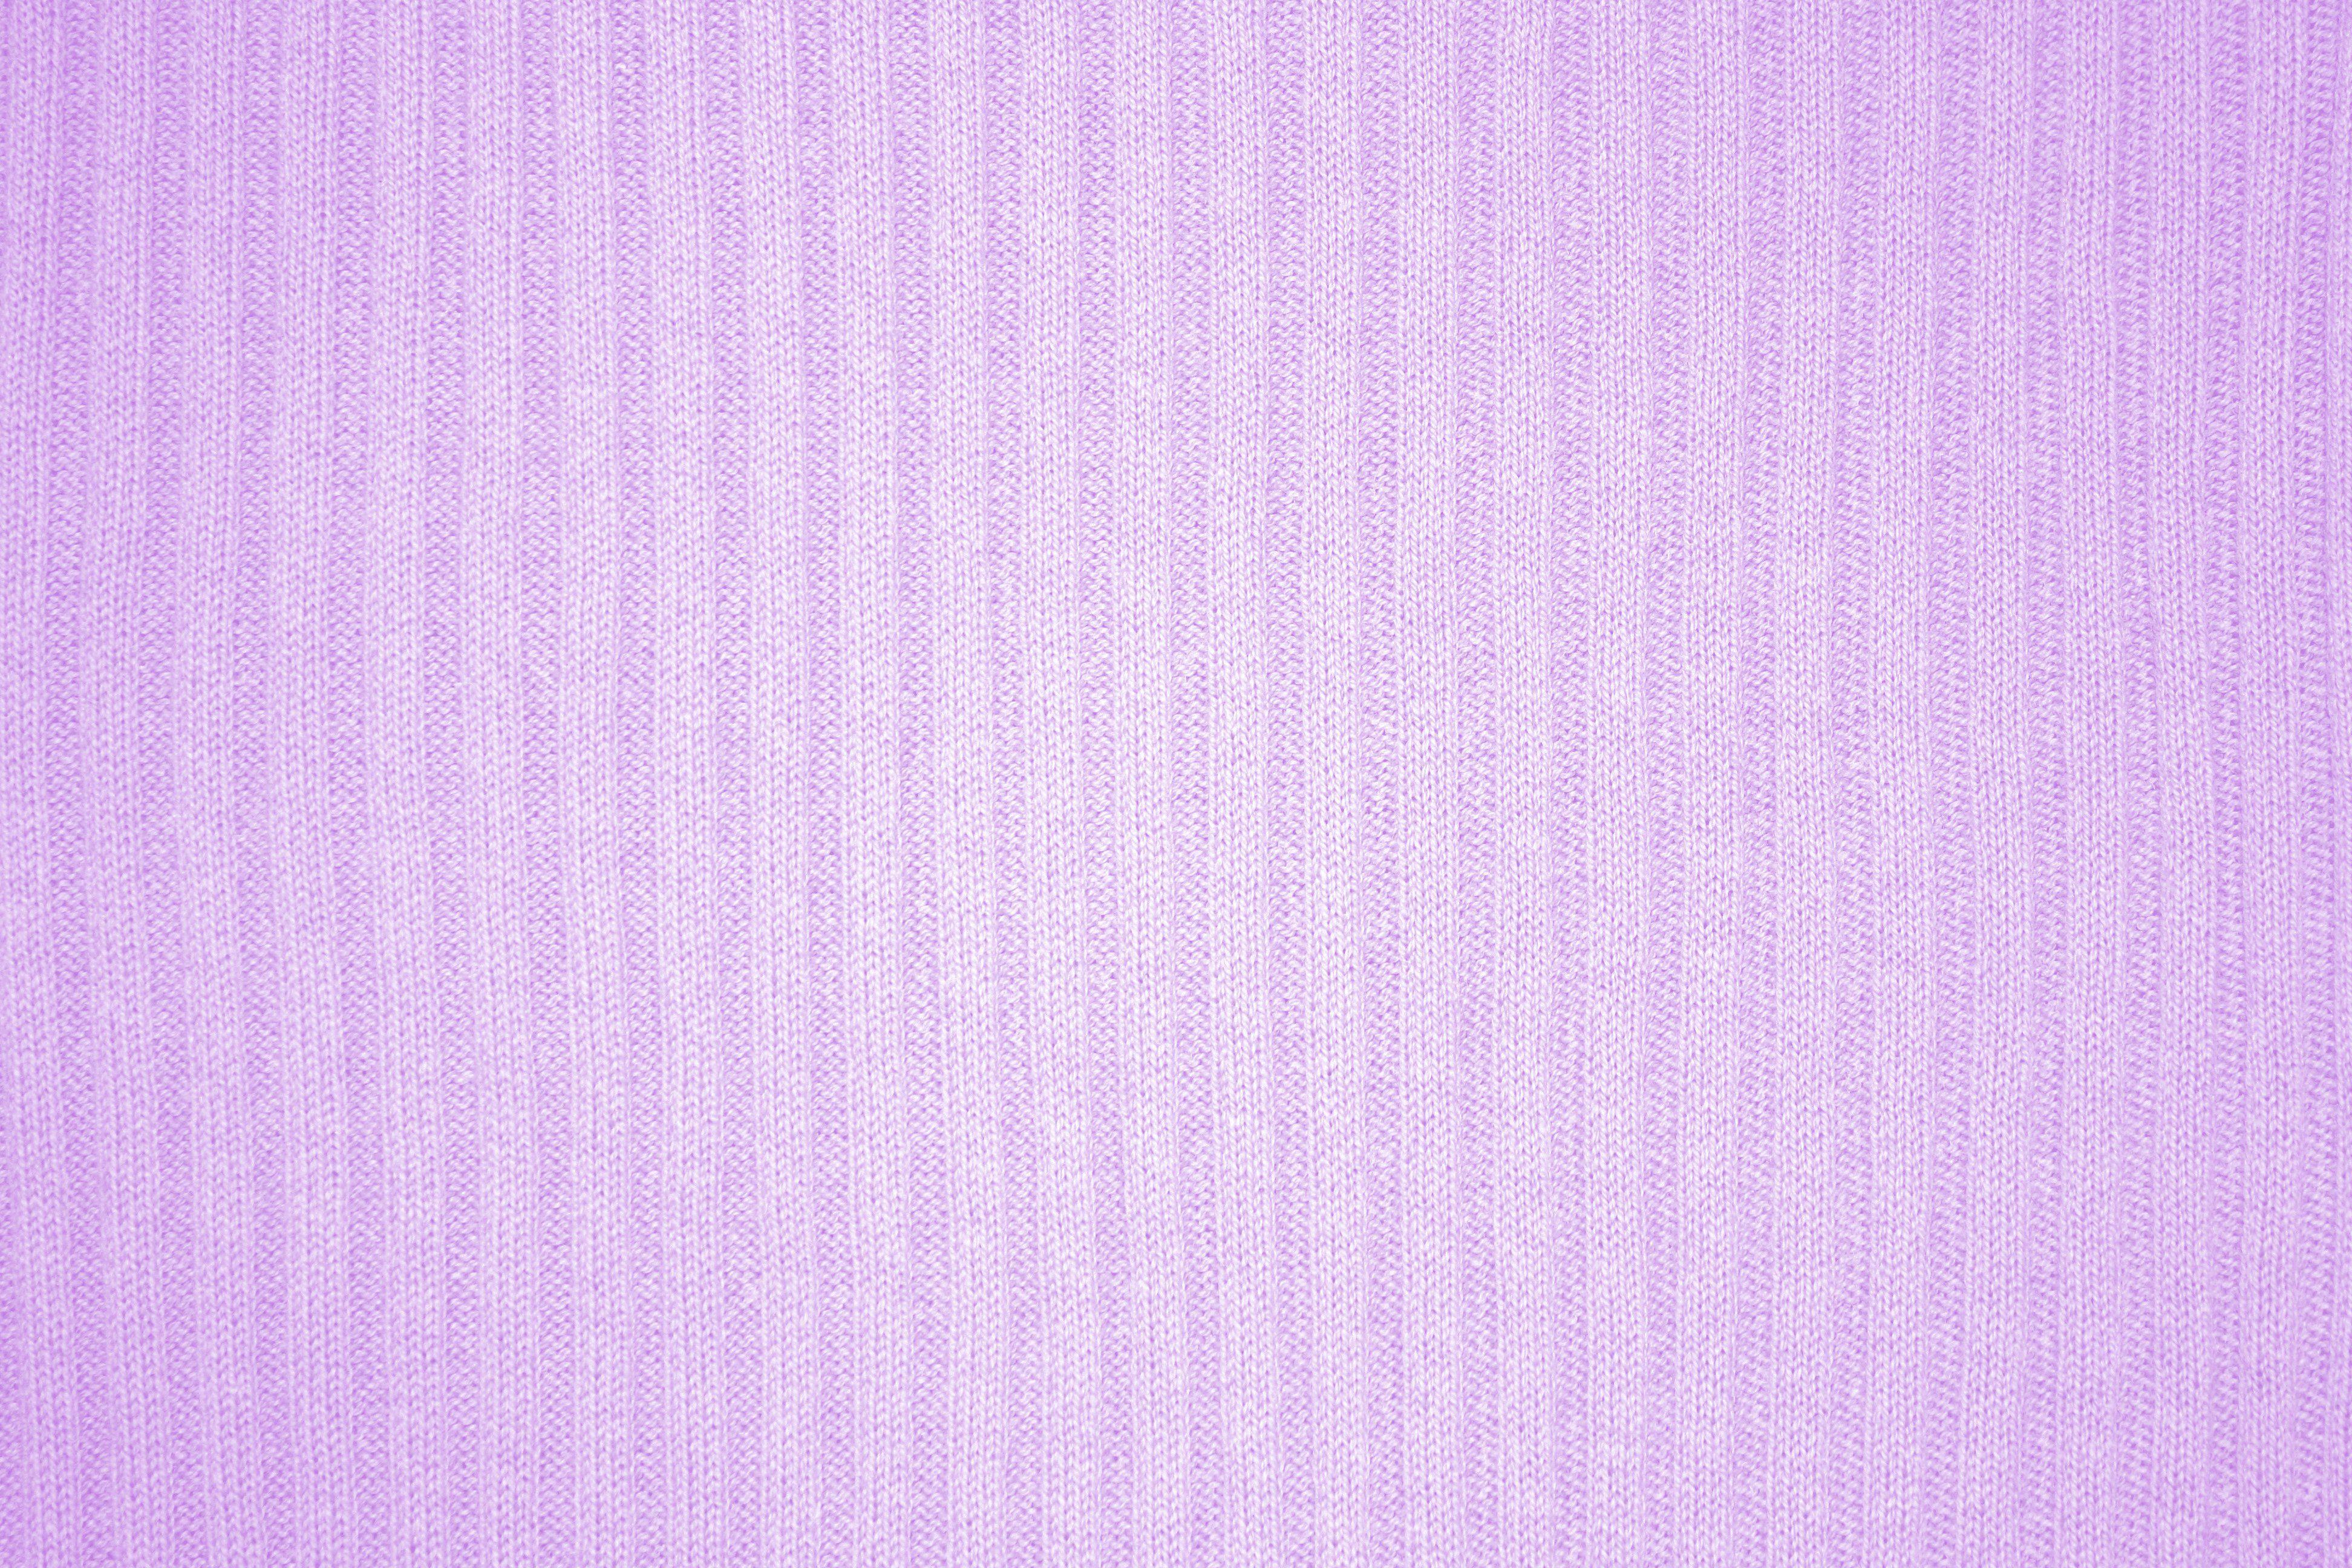 Light Purple Background. Lavender Colored Ribbed Knit Fabric